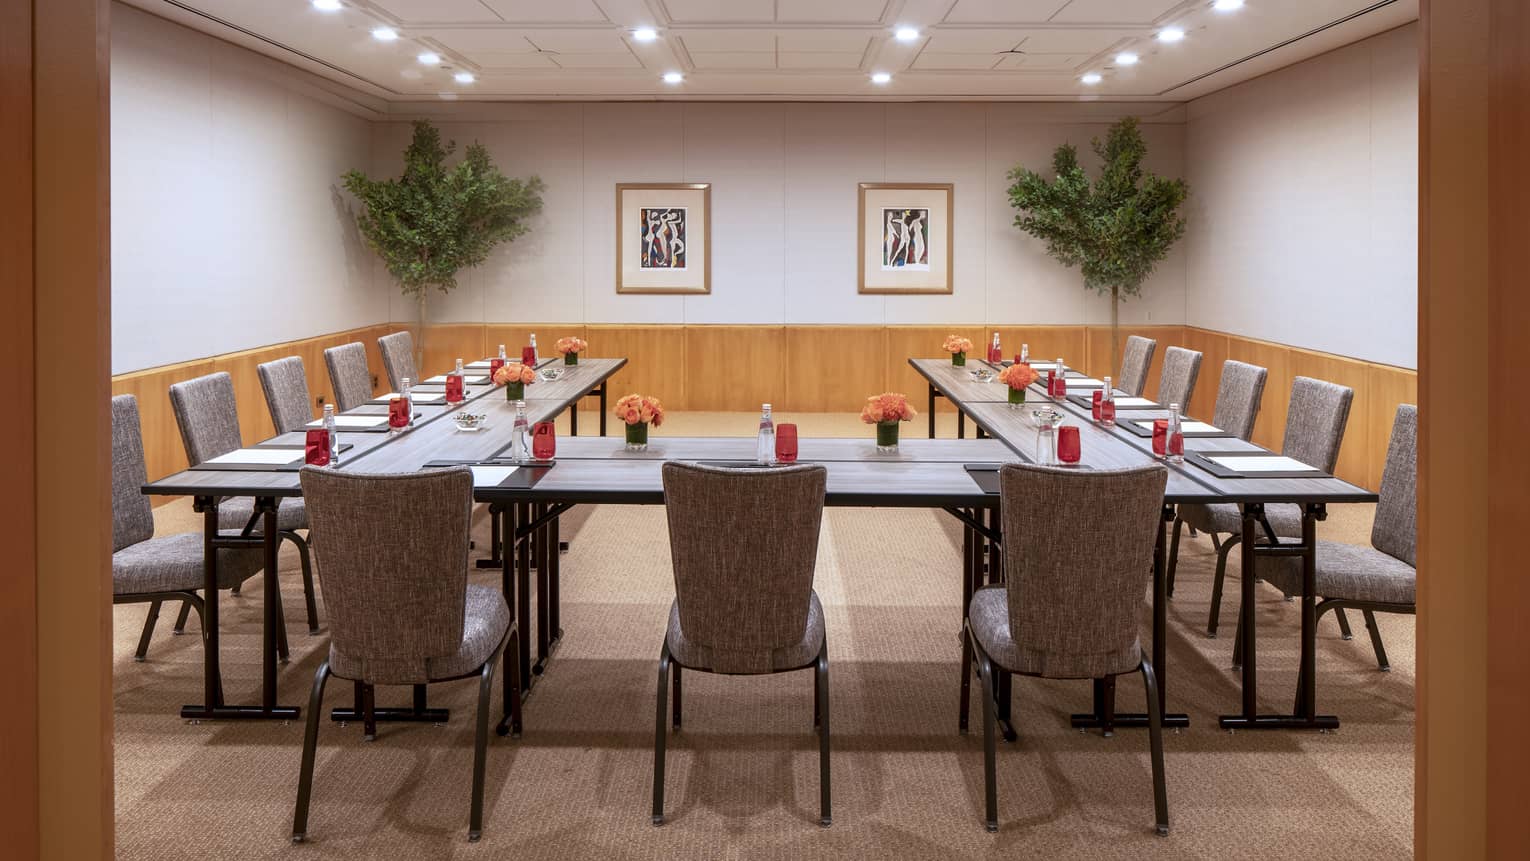 Multiple long, rectangular boardroom tables are placed together to form a "U" shape facing blank wall and are set with a black folder, white paper, pen and clear bottles filled with a red soda. 